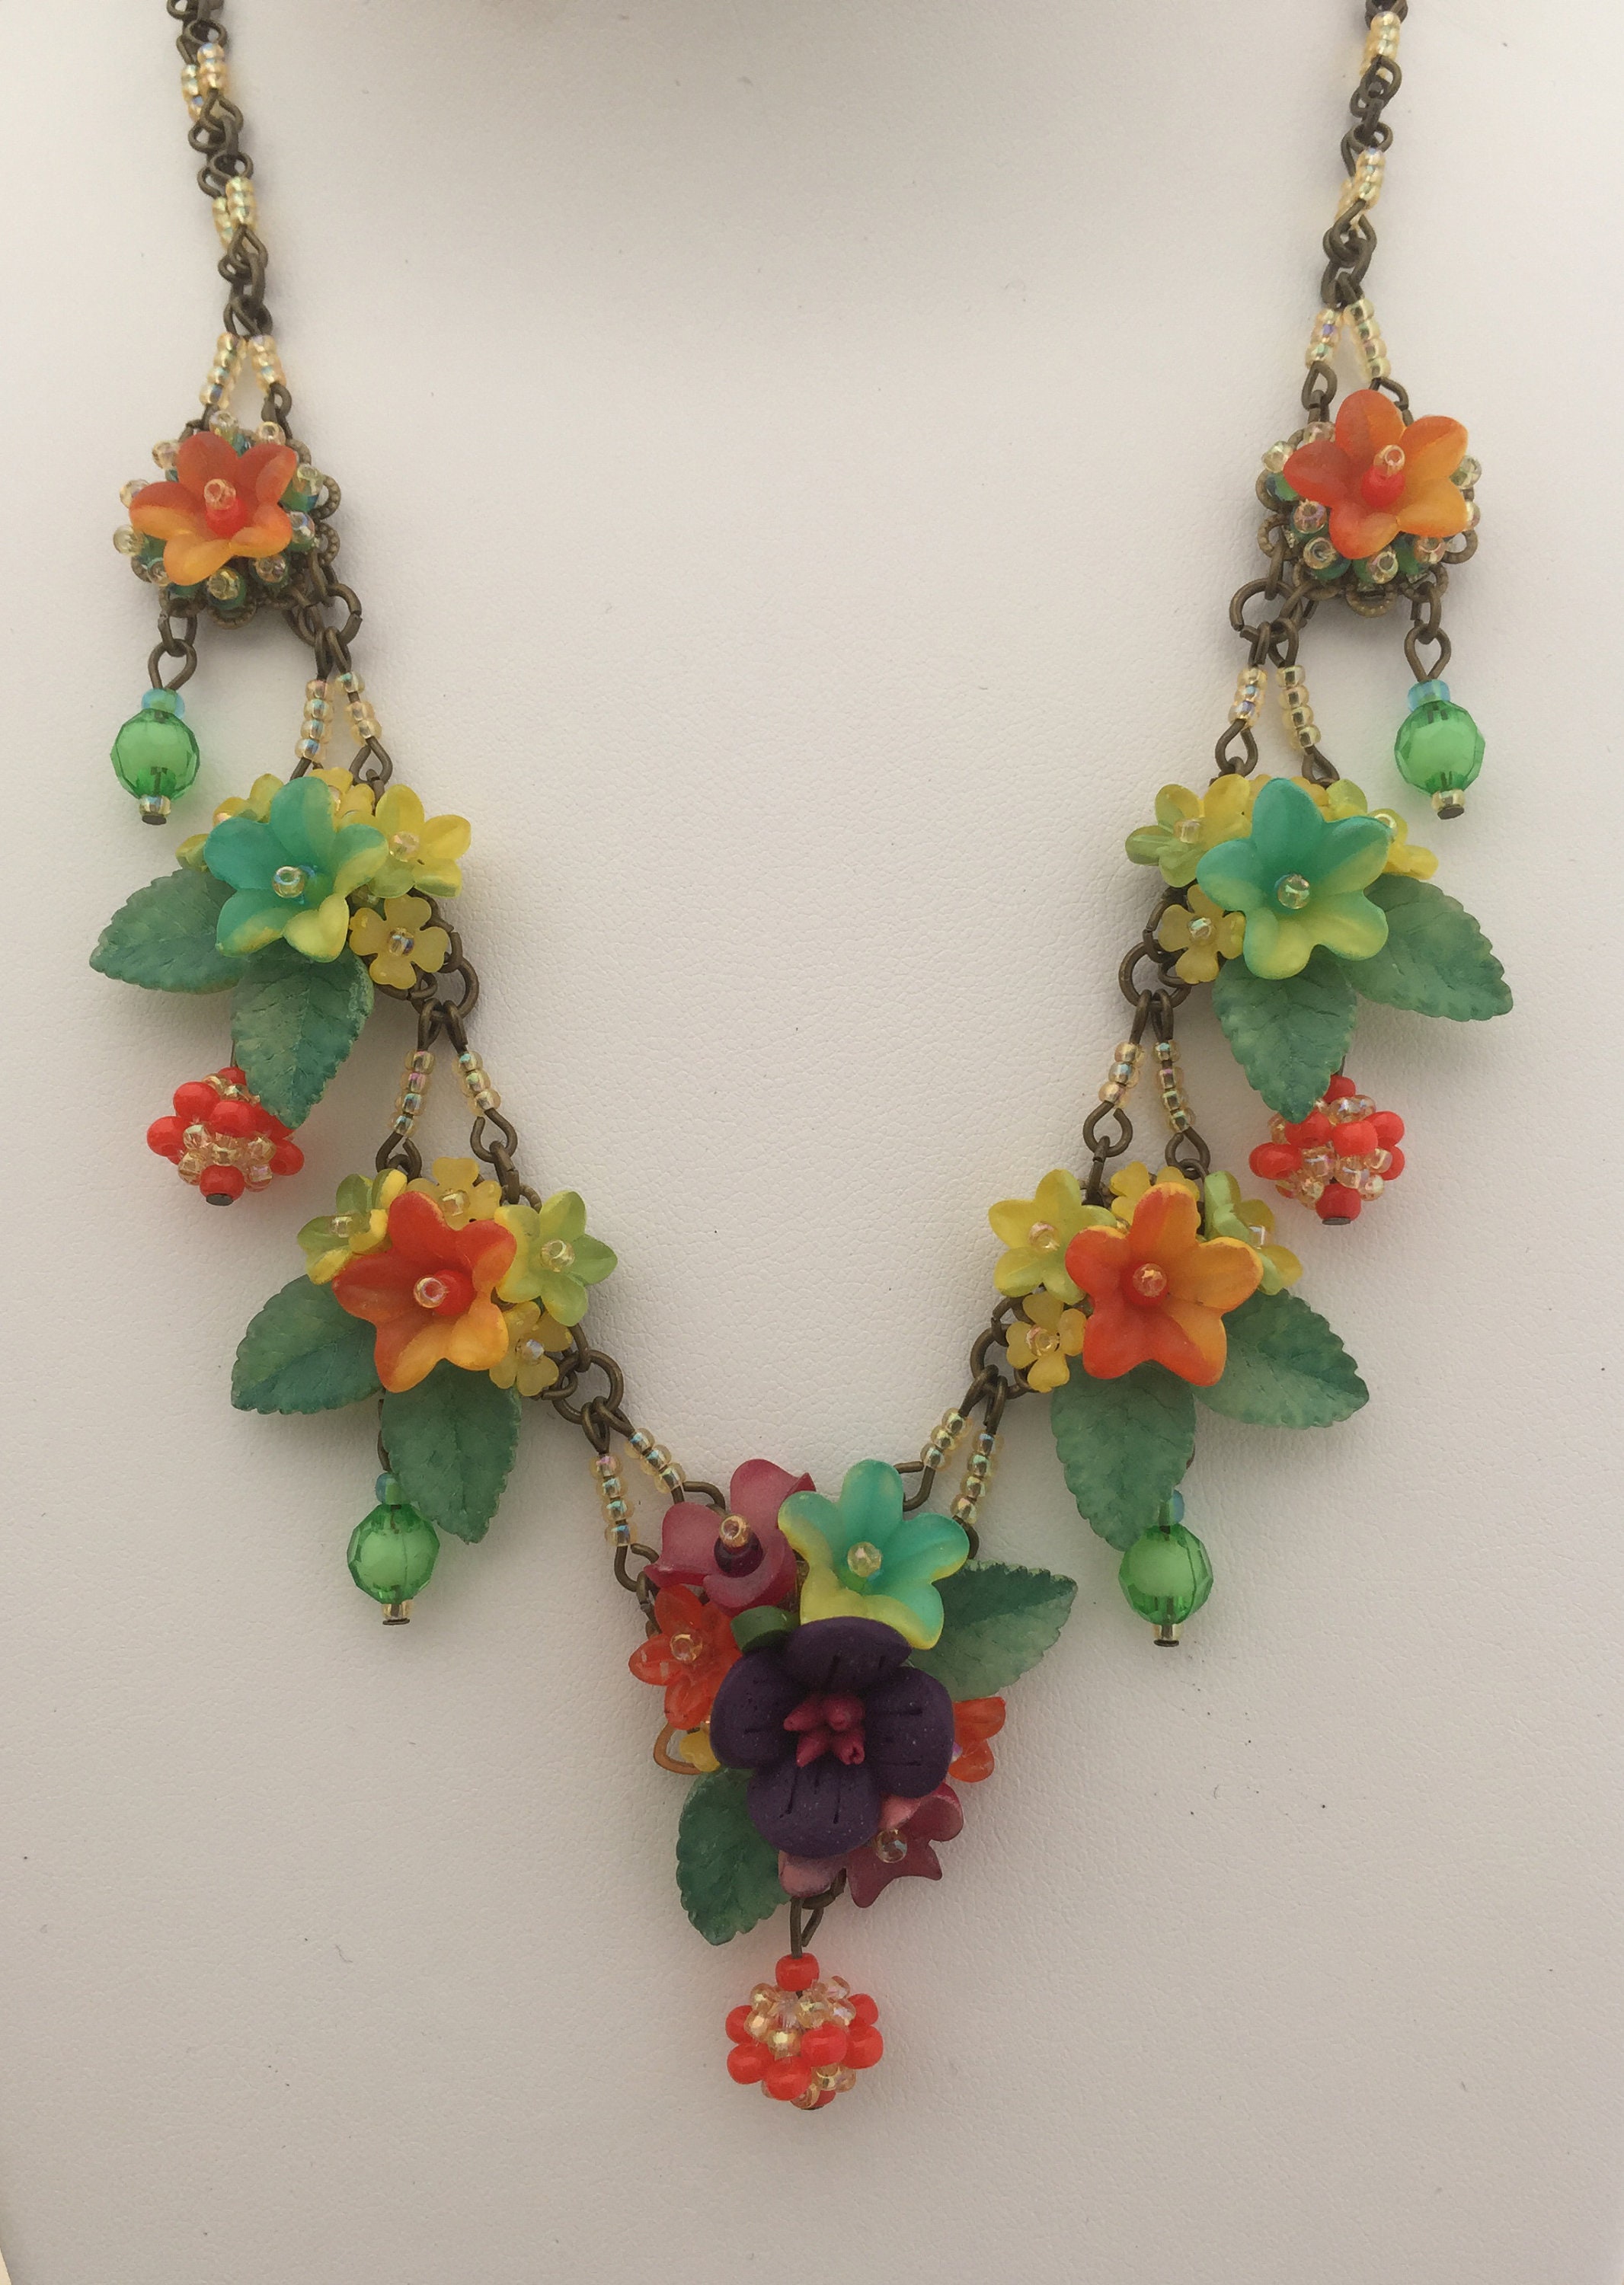 STUNNING MULTI COLOR Necklace Hand Beaded by Designer Colleen - Etsy